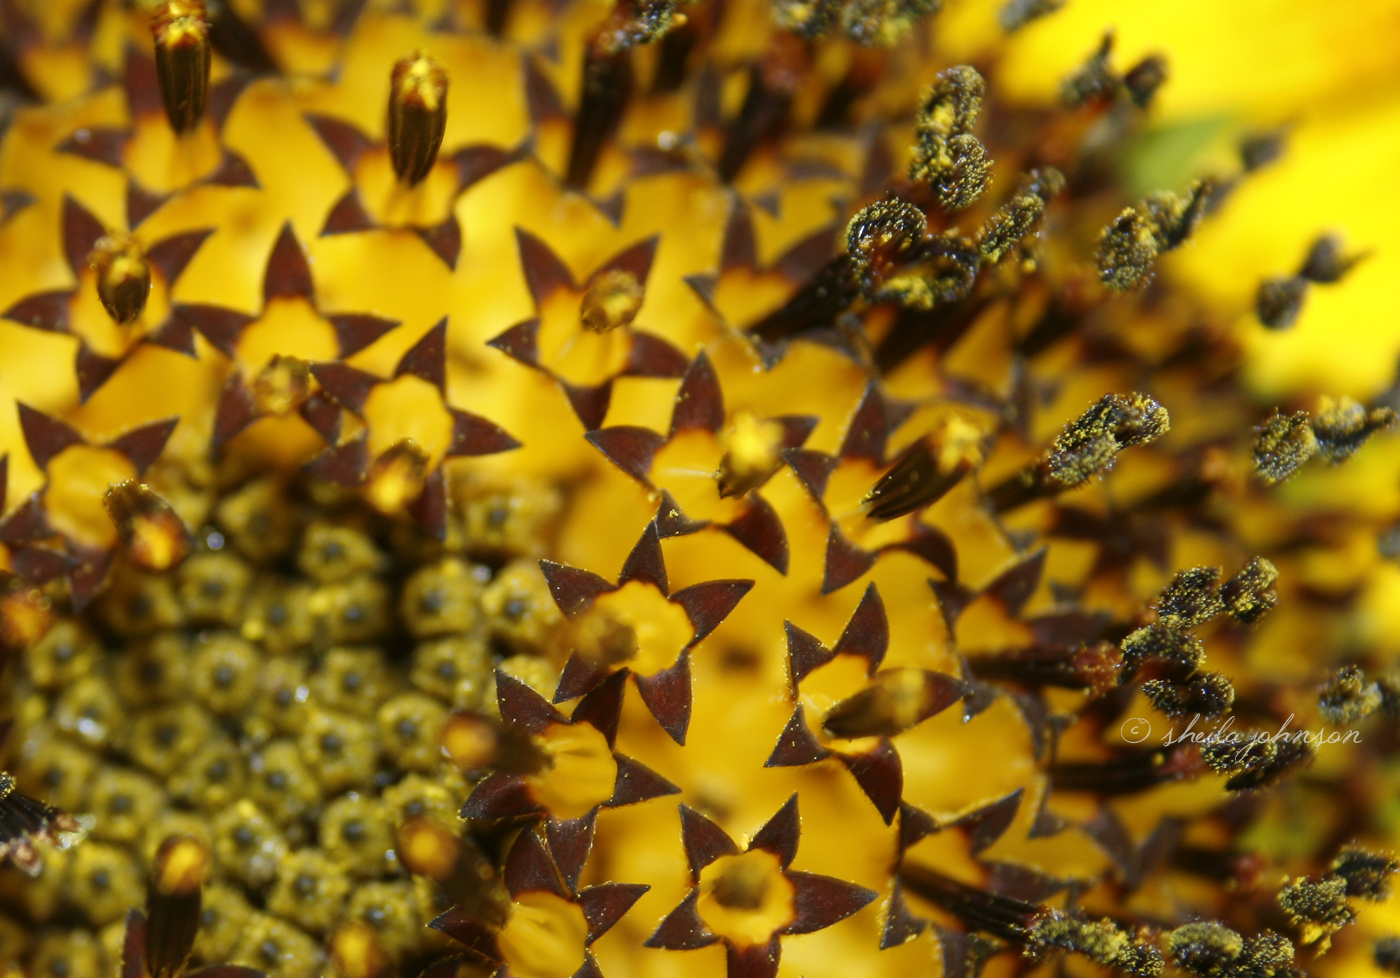 If You Look Closely Enough, You Can See That The Giant That Is A Sunflower Is Made Up Of Hundreds (Maybe Thousands) Of Tiny Little Flower-Like Parts.